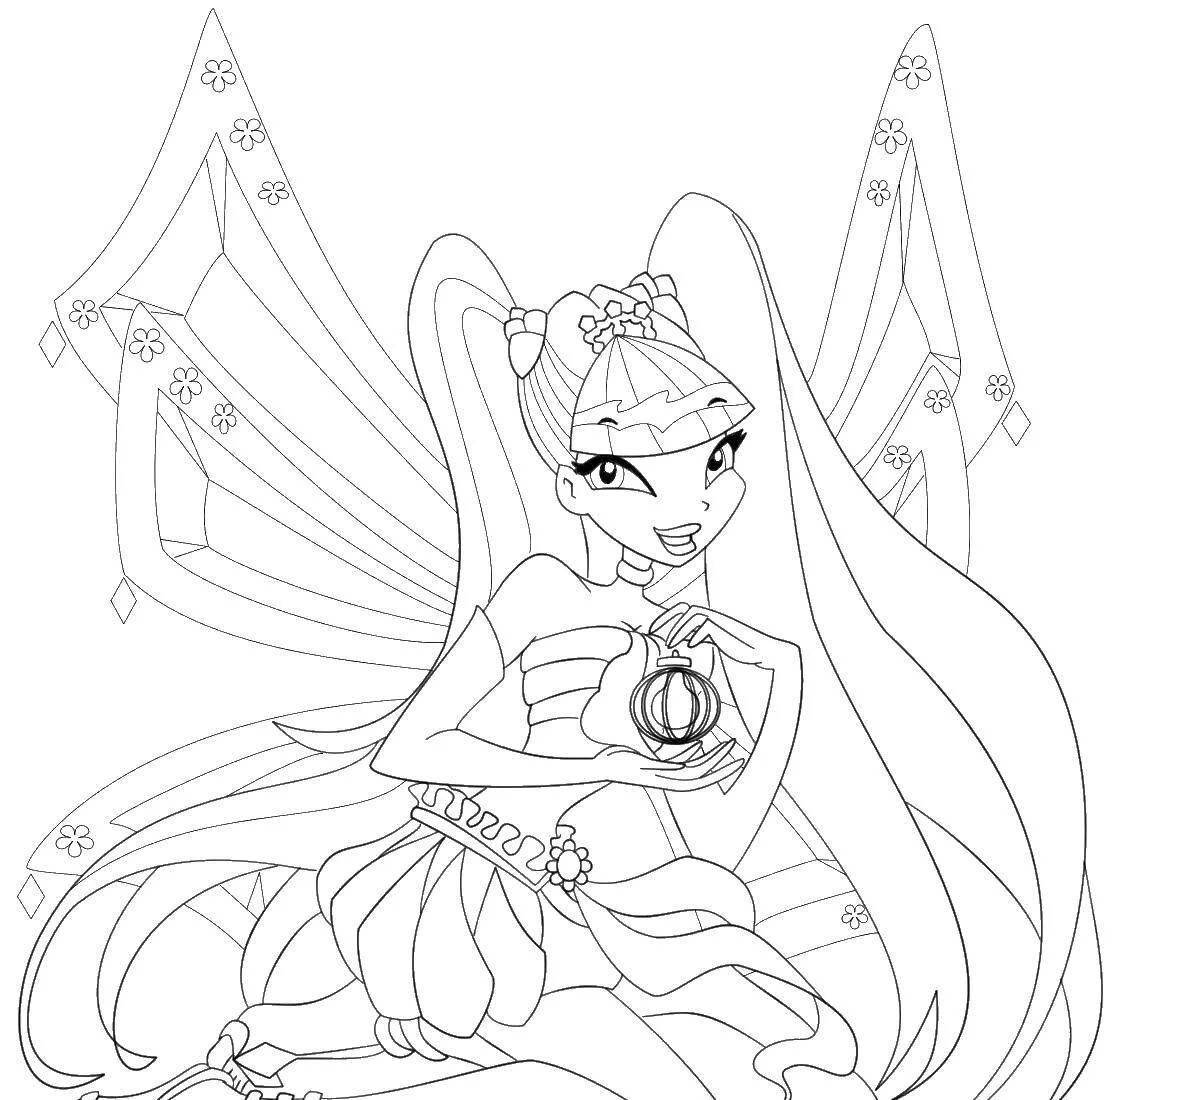 Lovely winx stella coloring page